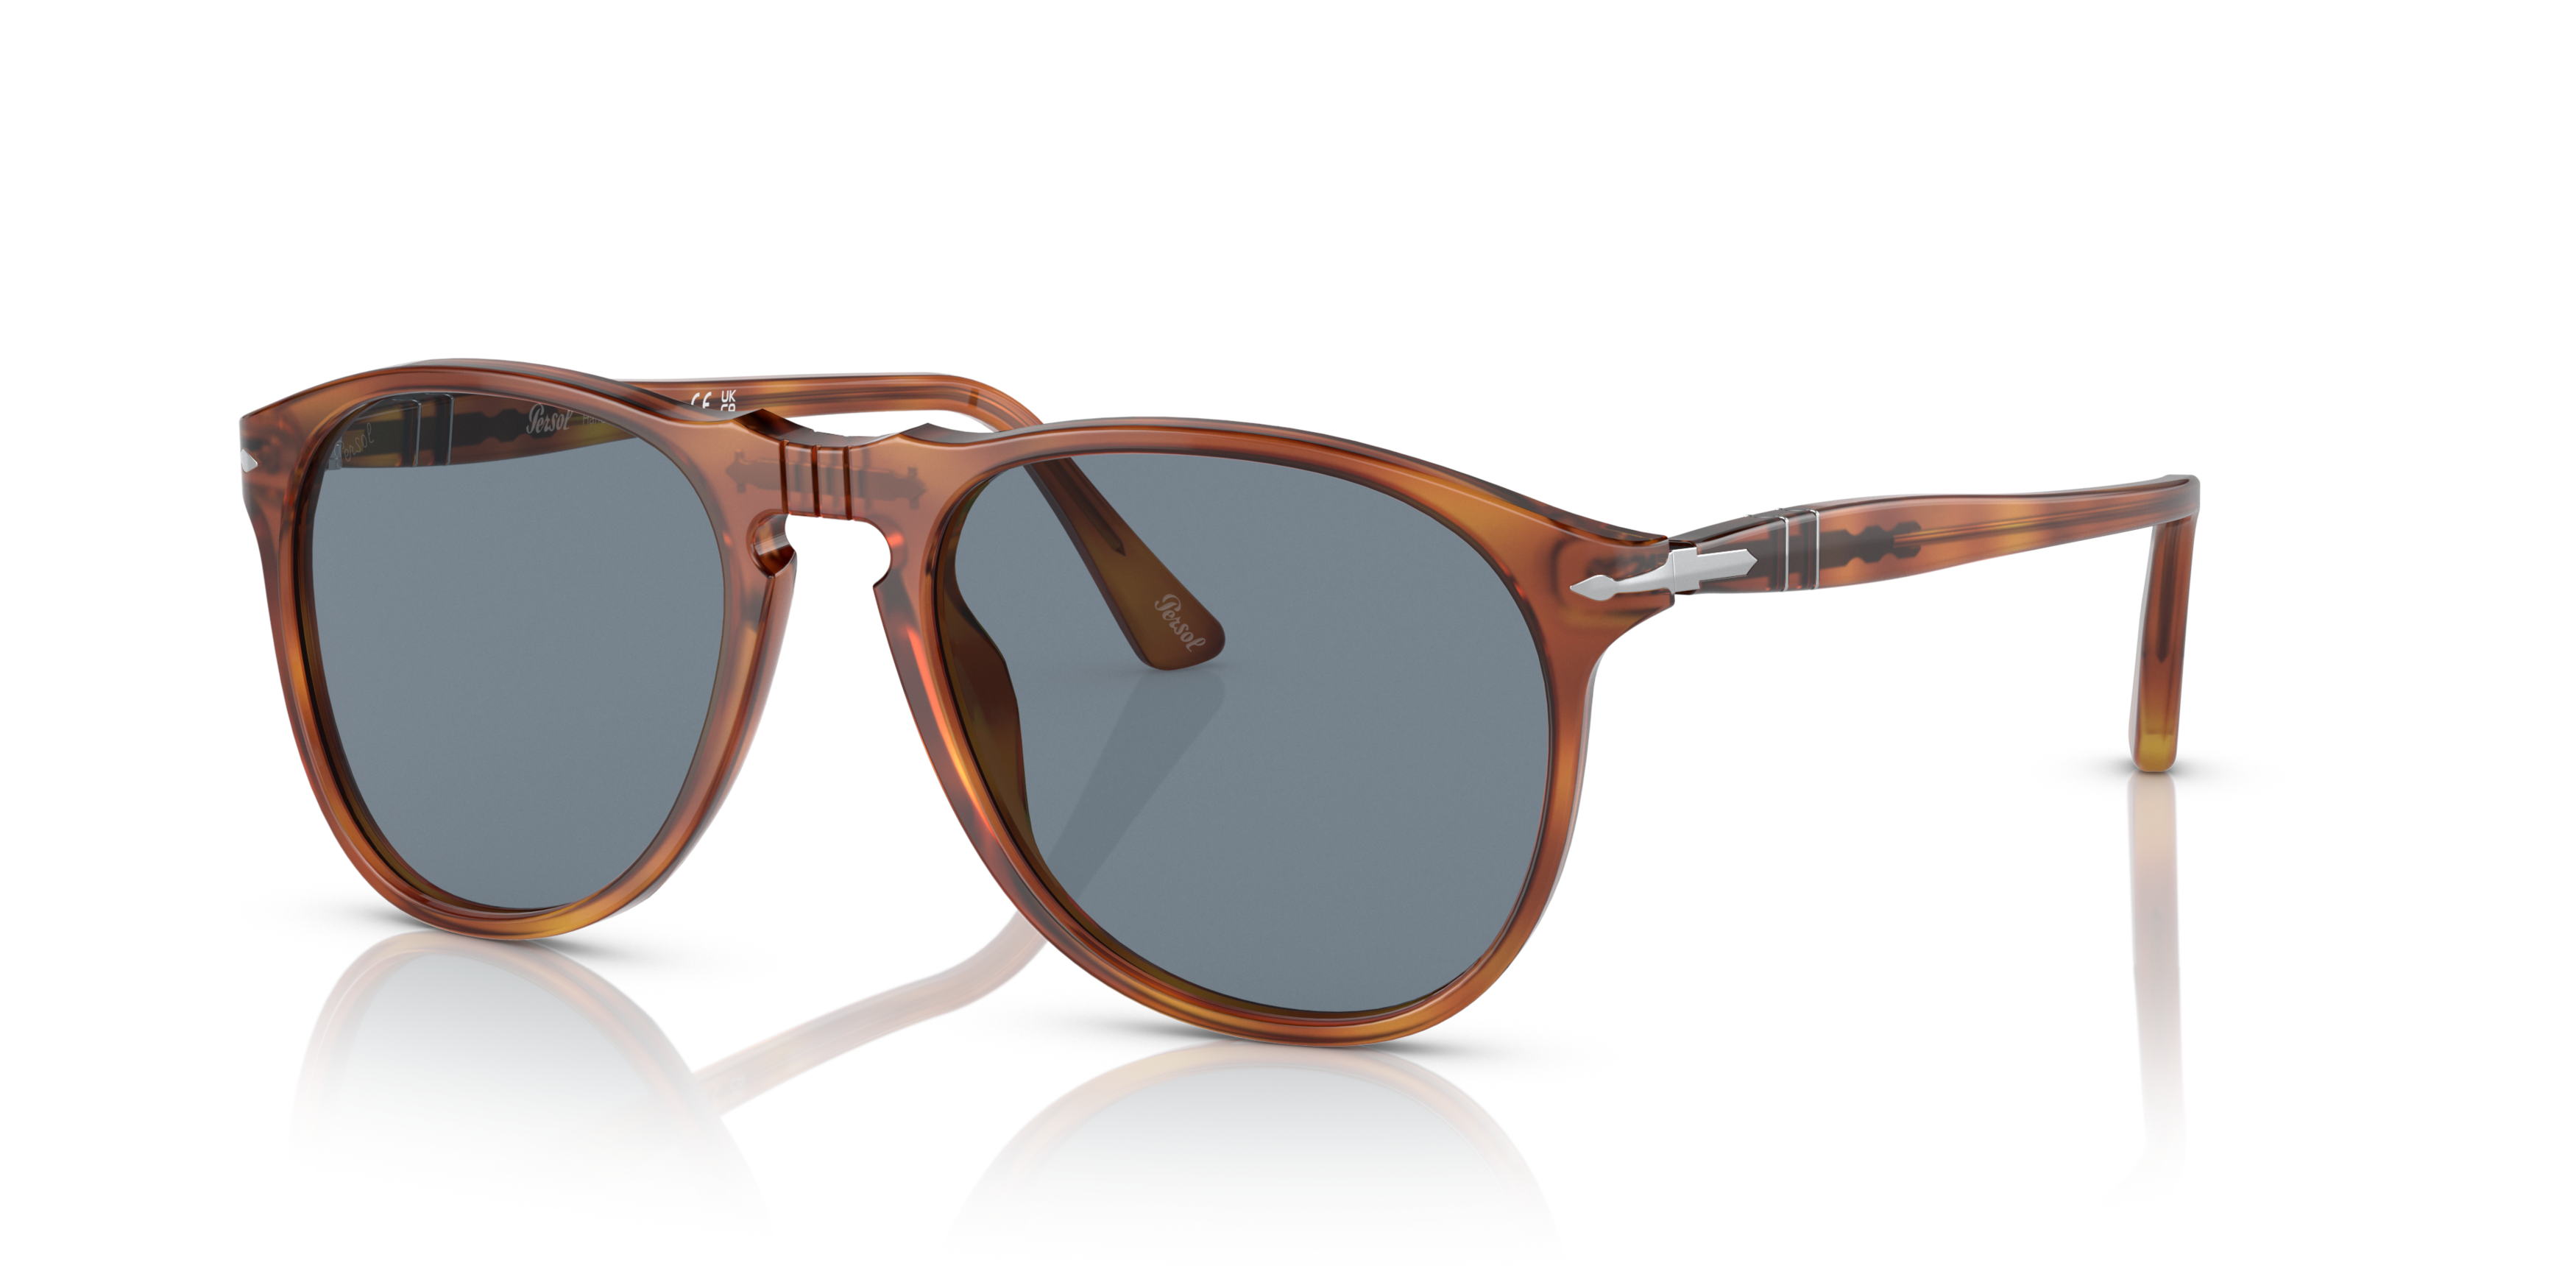 [products.image.angle_left01] Persol 0PO9649S 96/56